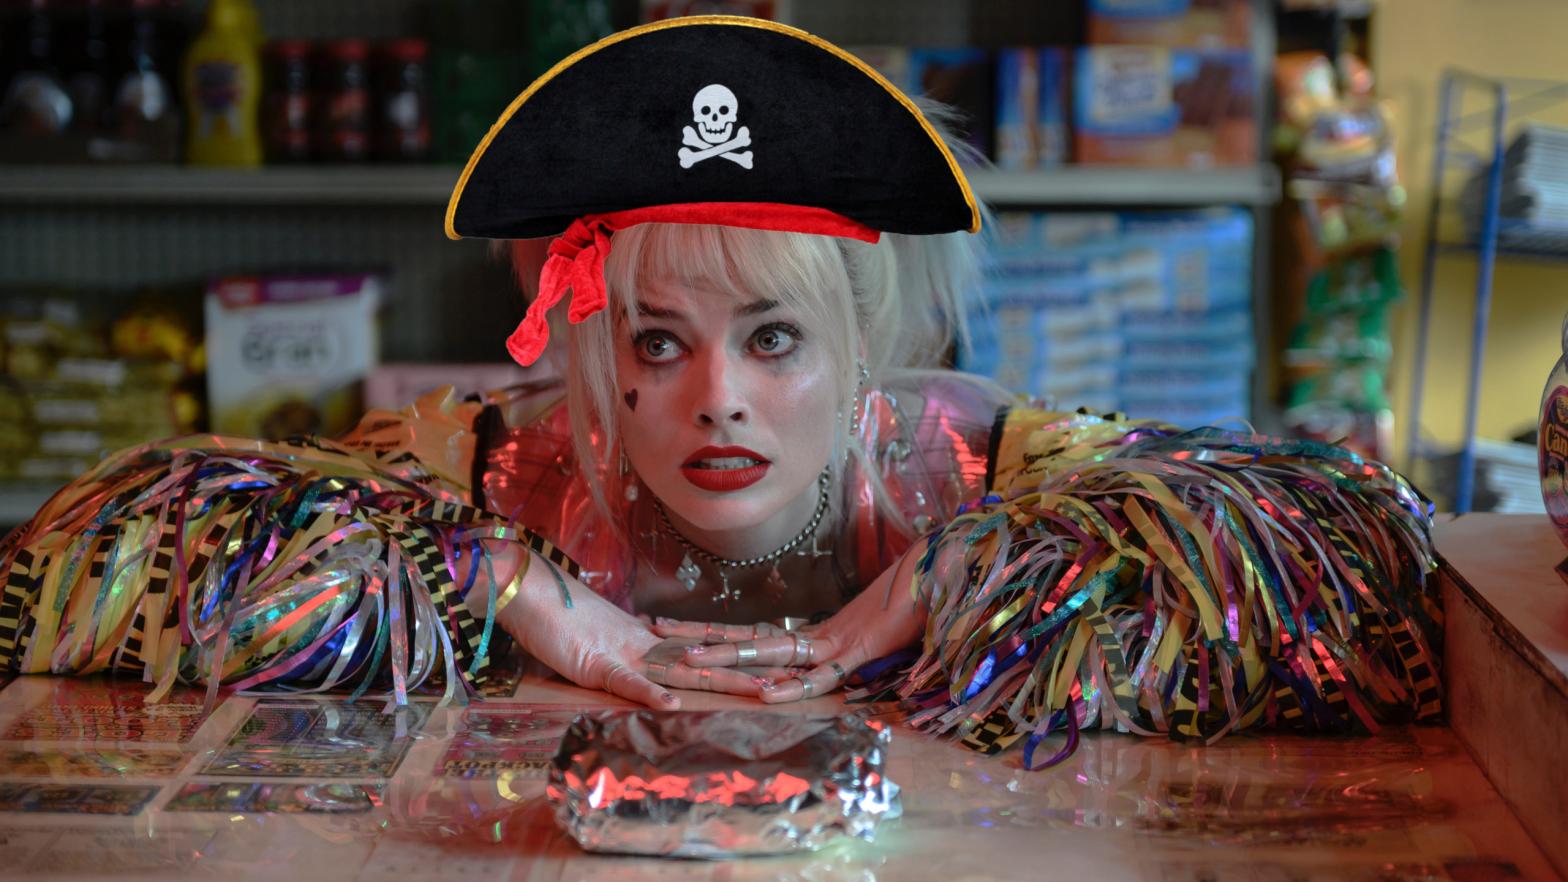 Margot Robbie as Harley Quinn (with a pirate hat). (Photo: Warner Bros.)